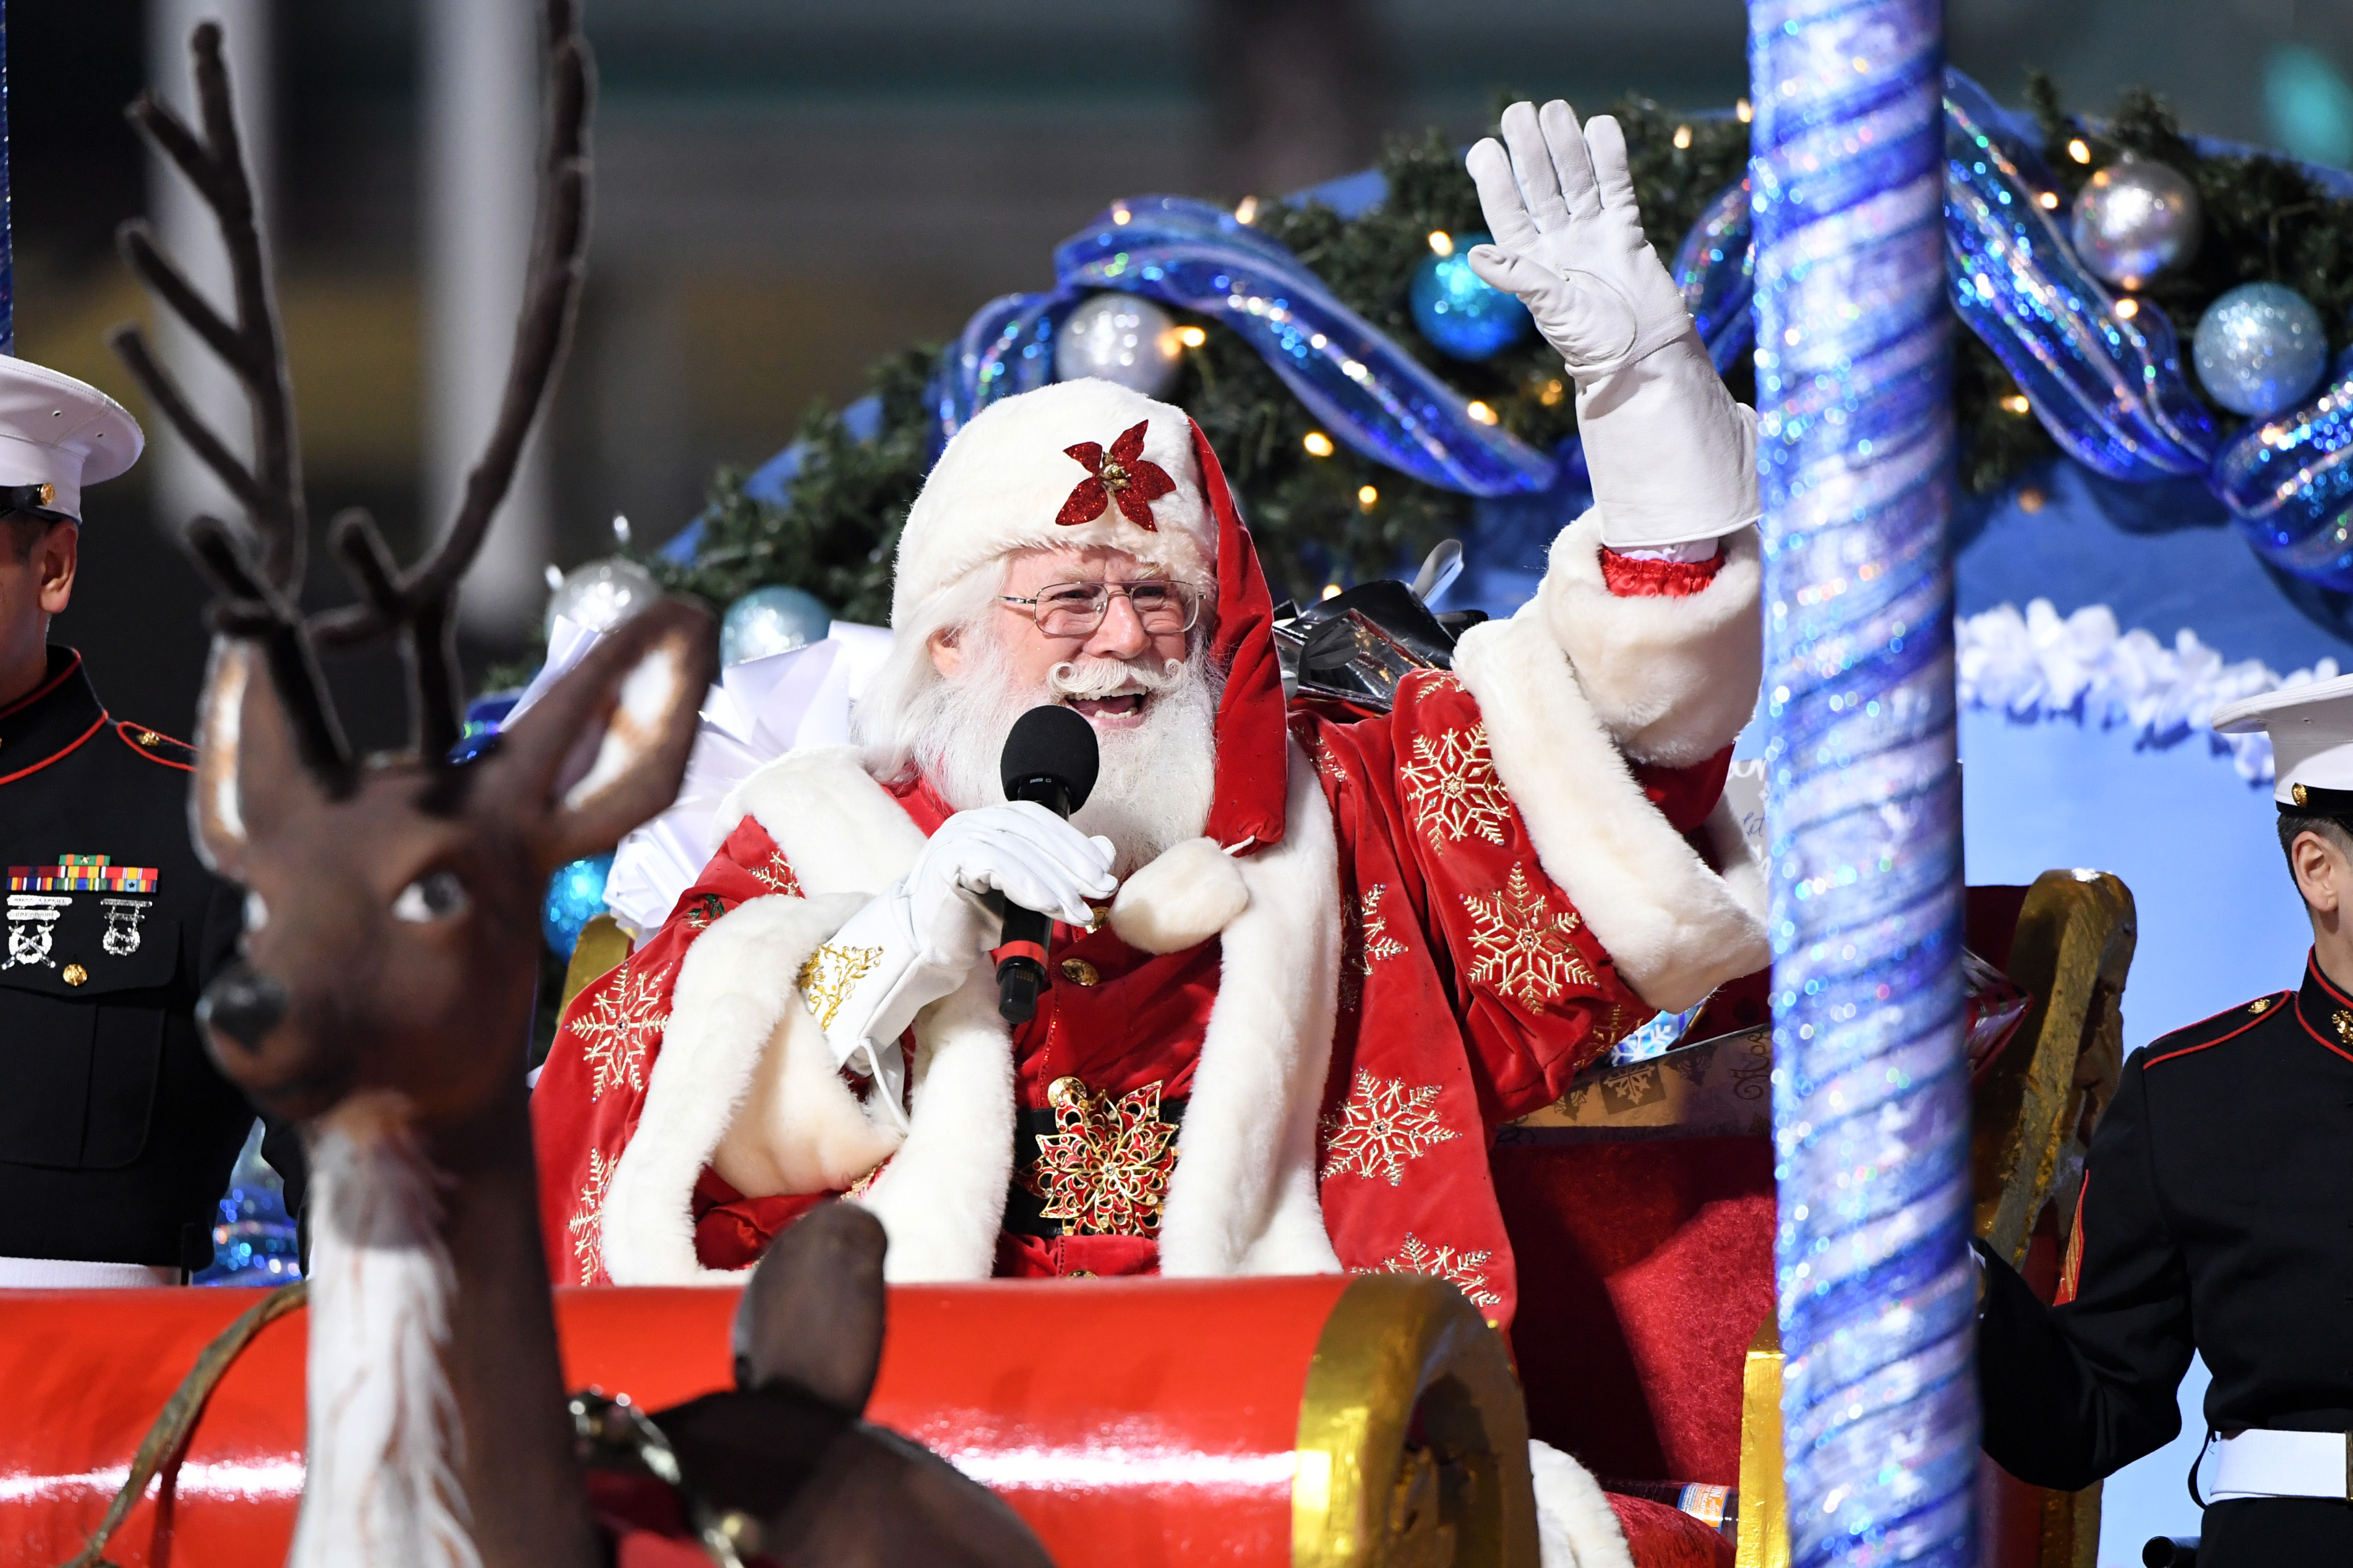 A Santa character at the 90th anniversary of the Hollywood Christmas Parade in Hollywood, California on November 27, 2022 | Source: Getty Images